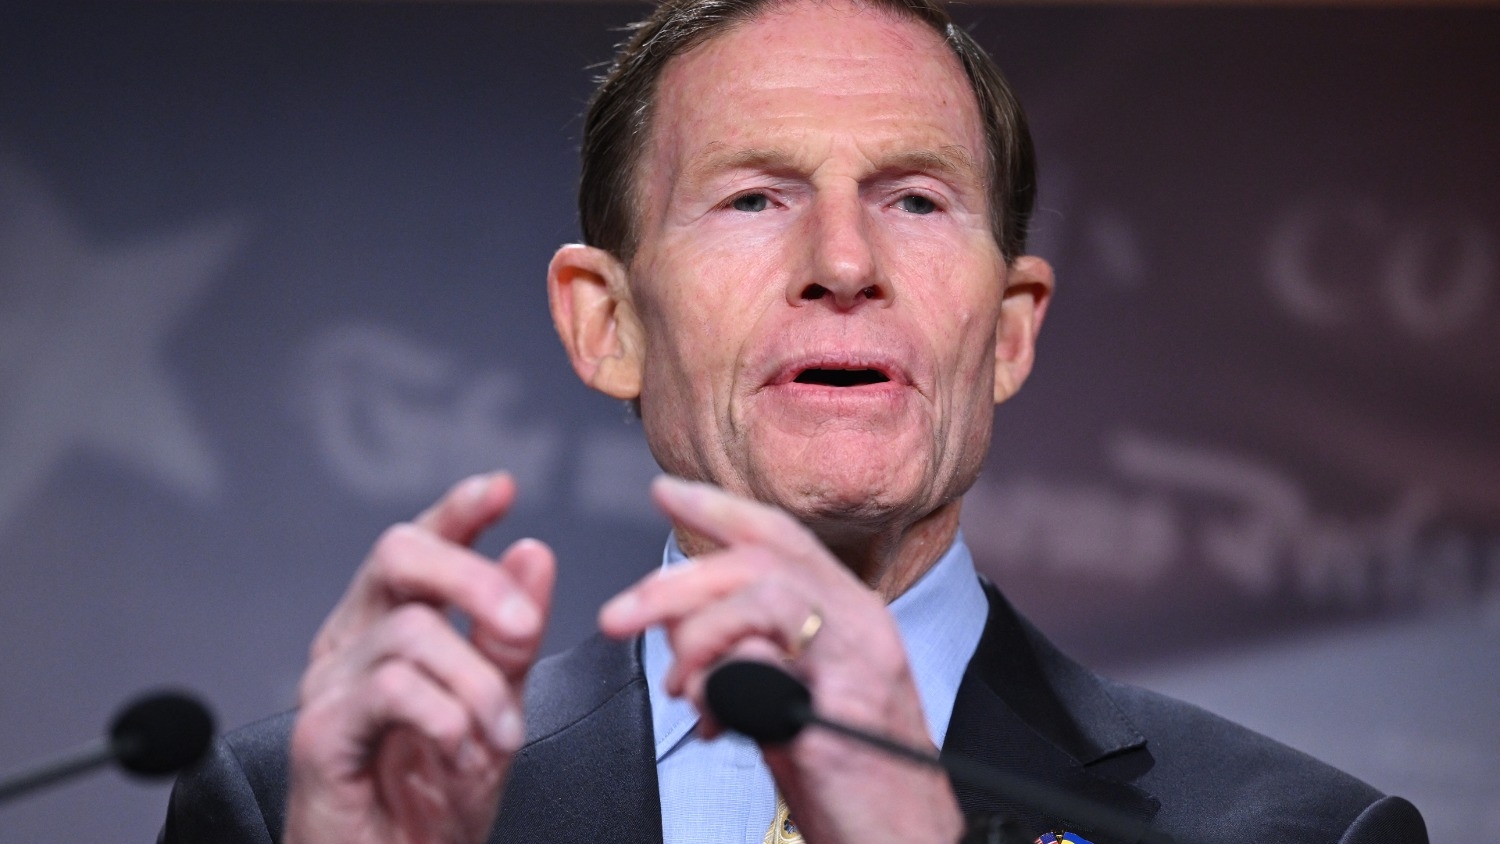 Earlier this month, Blumenthal opened a probe into the deal, demanding a trove of documents from LIV Golf and the PGA Tour.